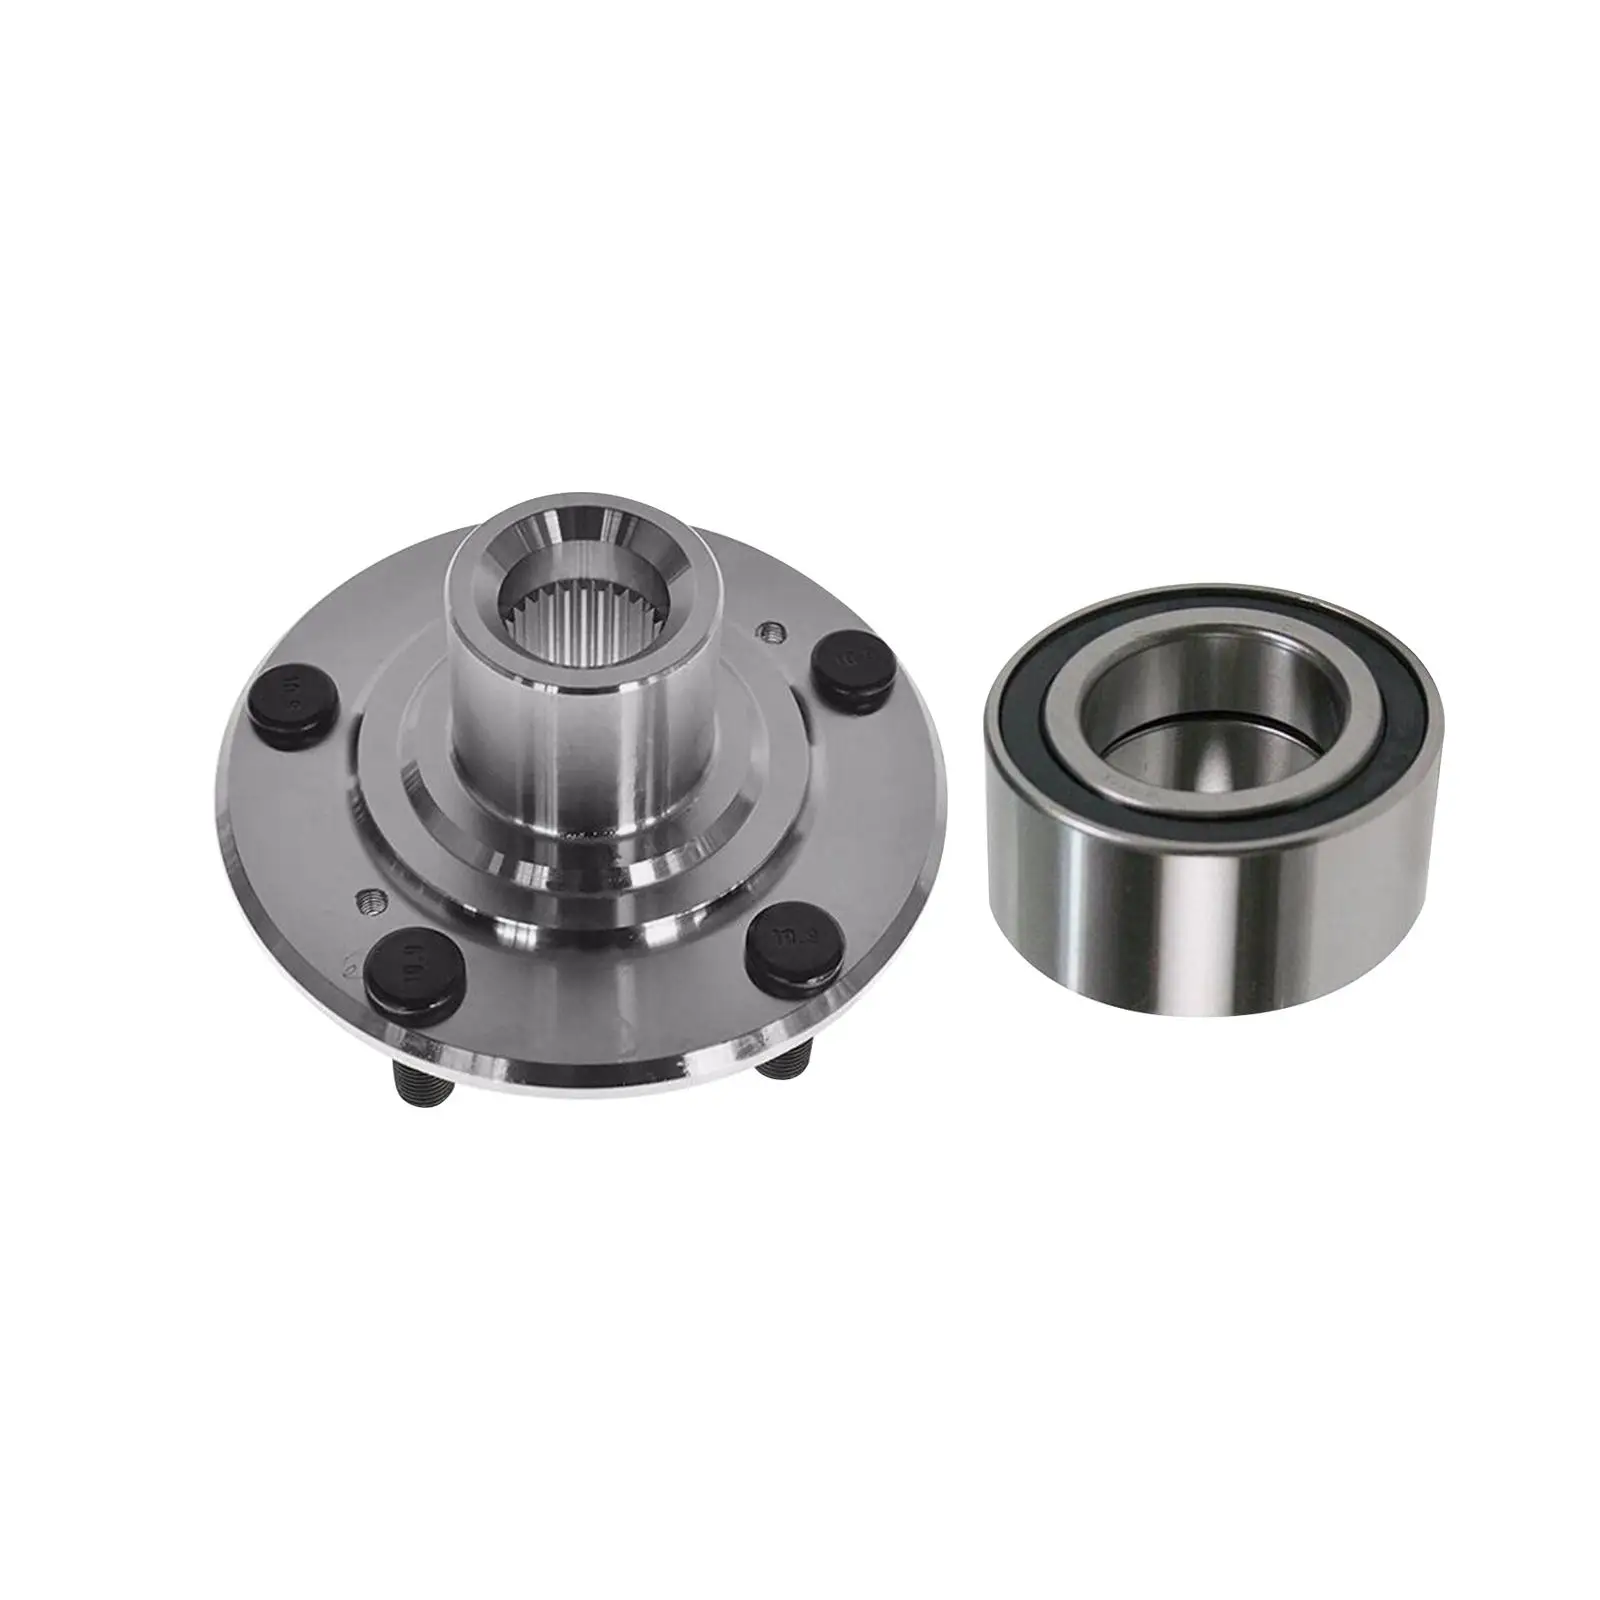 Front Wheel Hub Bearing Set WH188 Nt510110 Hub81 510110 Durable Accessories Replacement Assembly for Lincoln Mkc 2015-2019